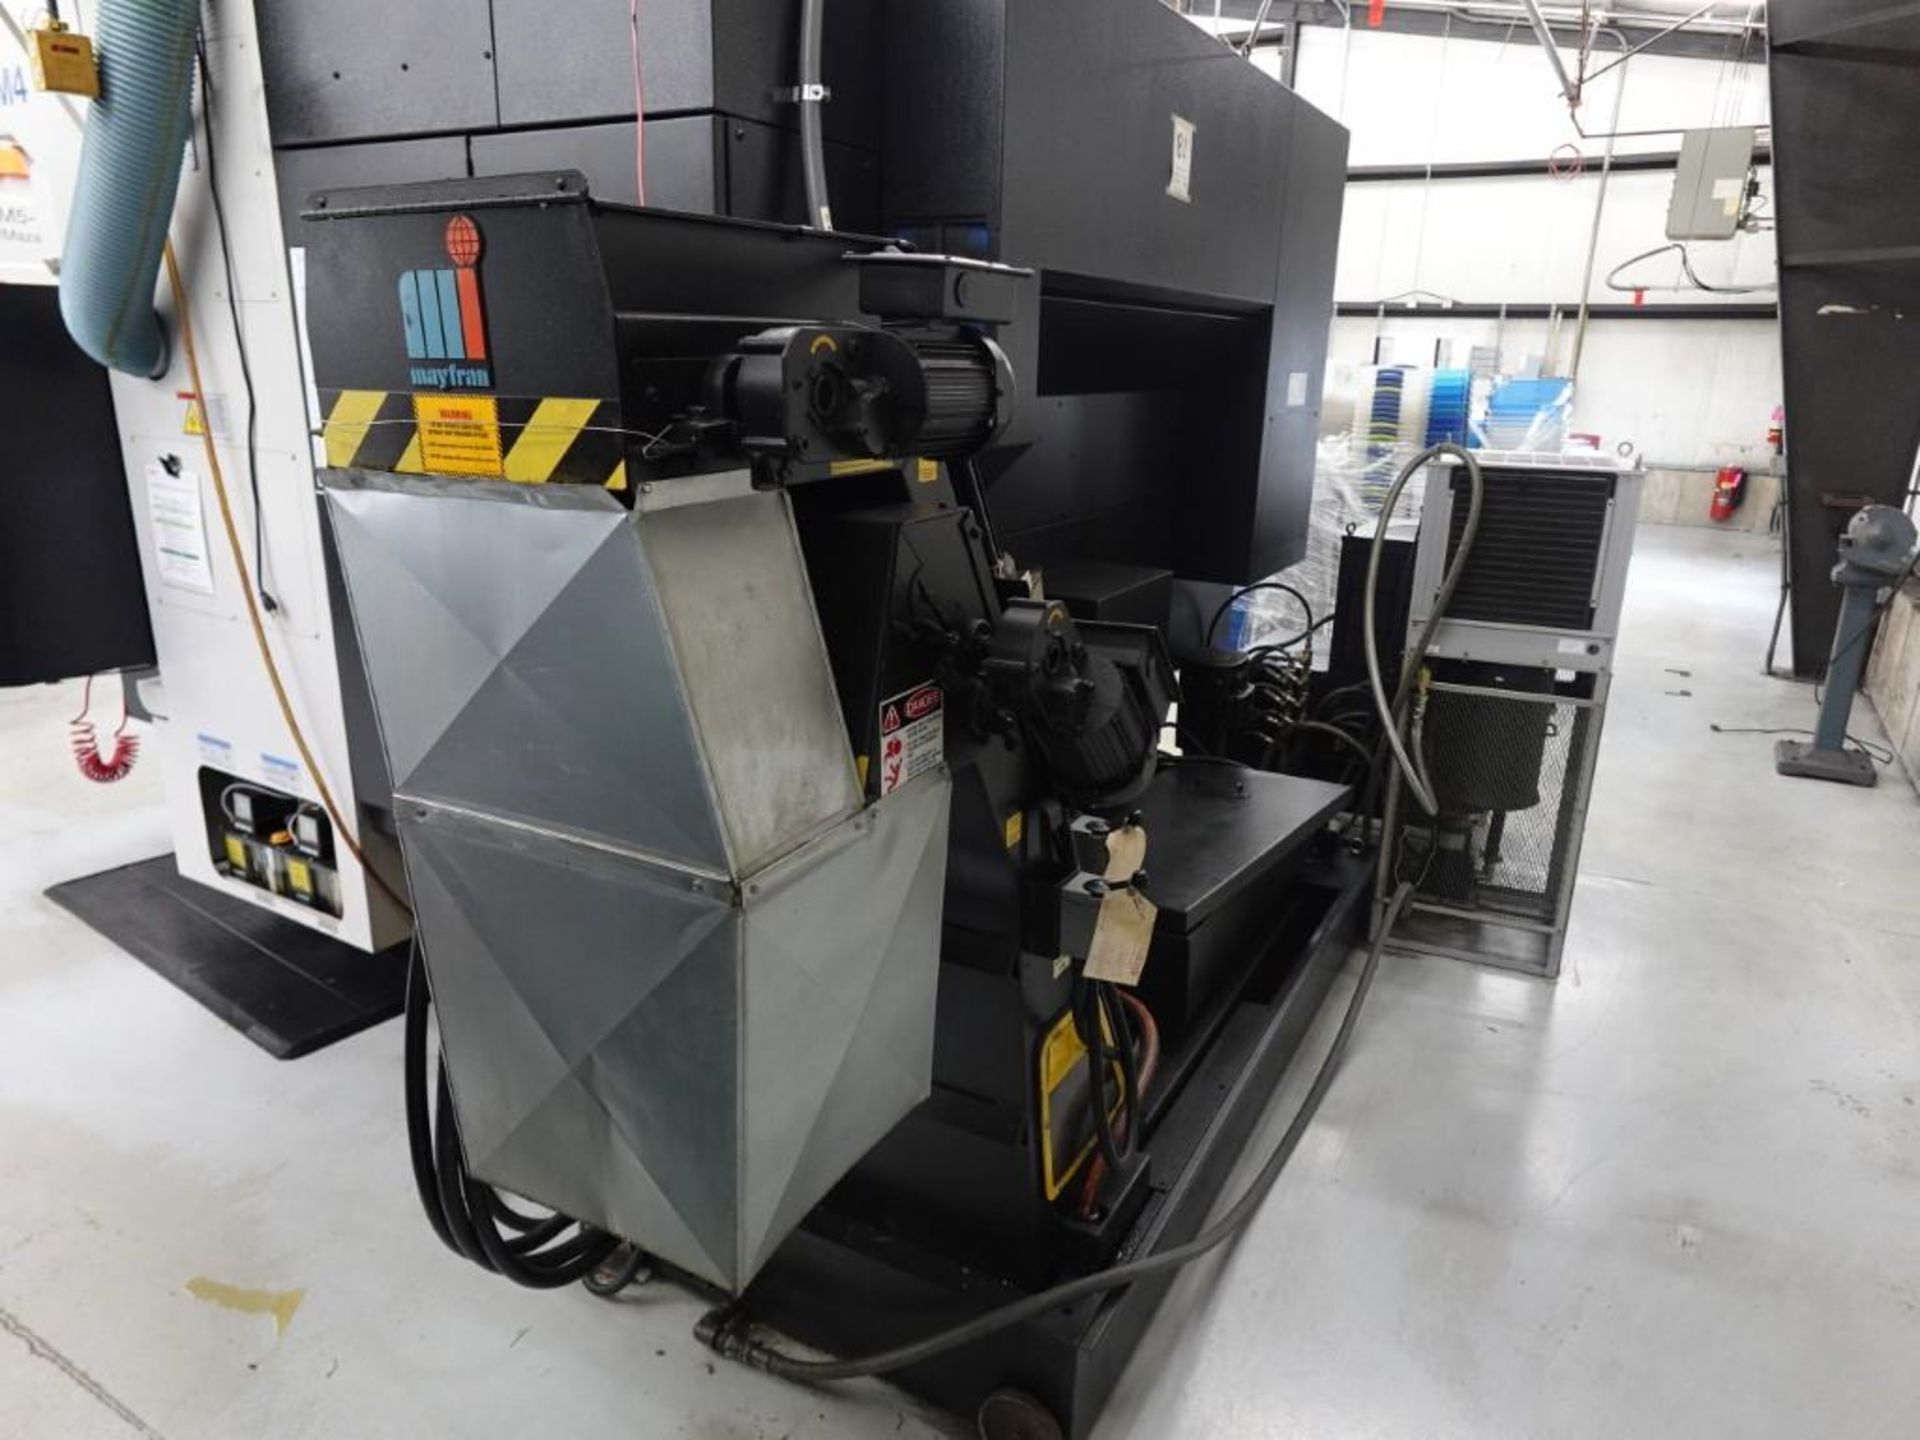 Mazak Variaxis 500-5X-II 5-Axis CNC Vertical Machining Center with Pallet Changer - Image 8 of 15